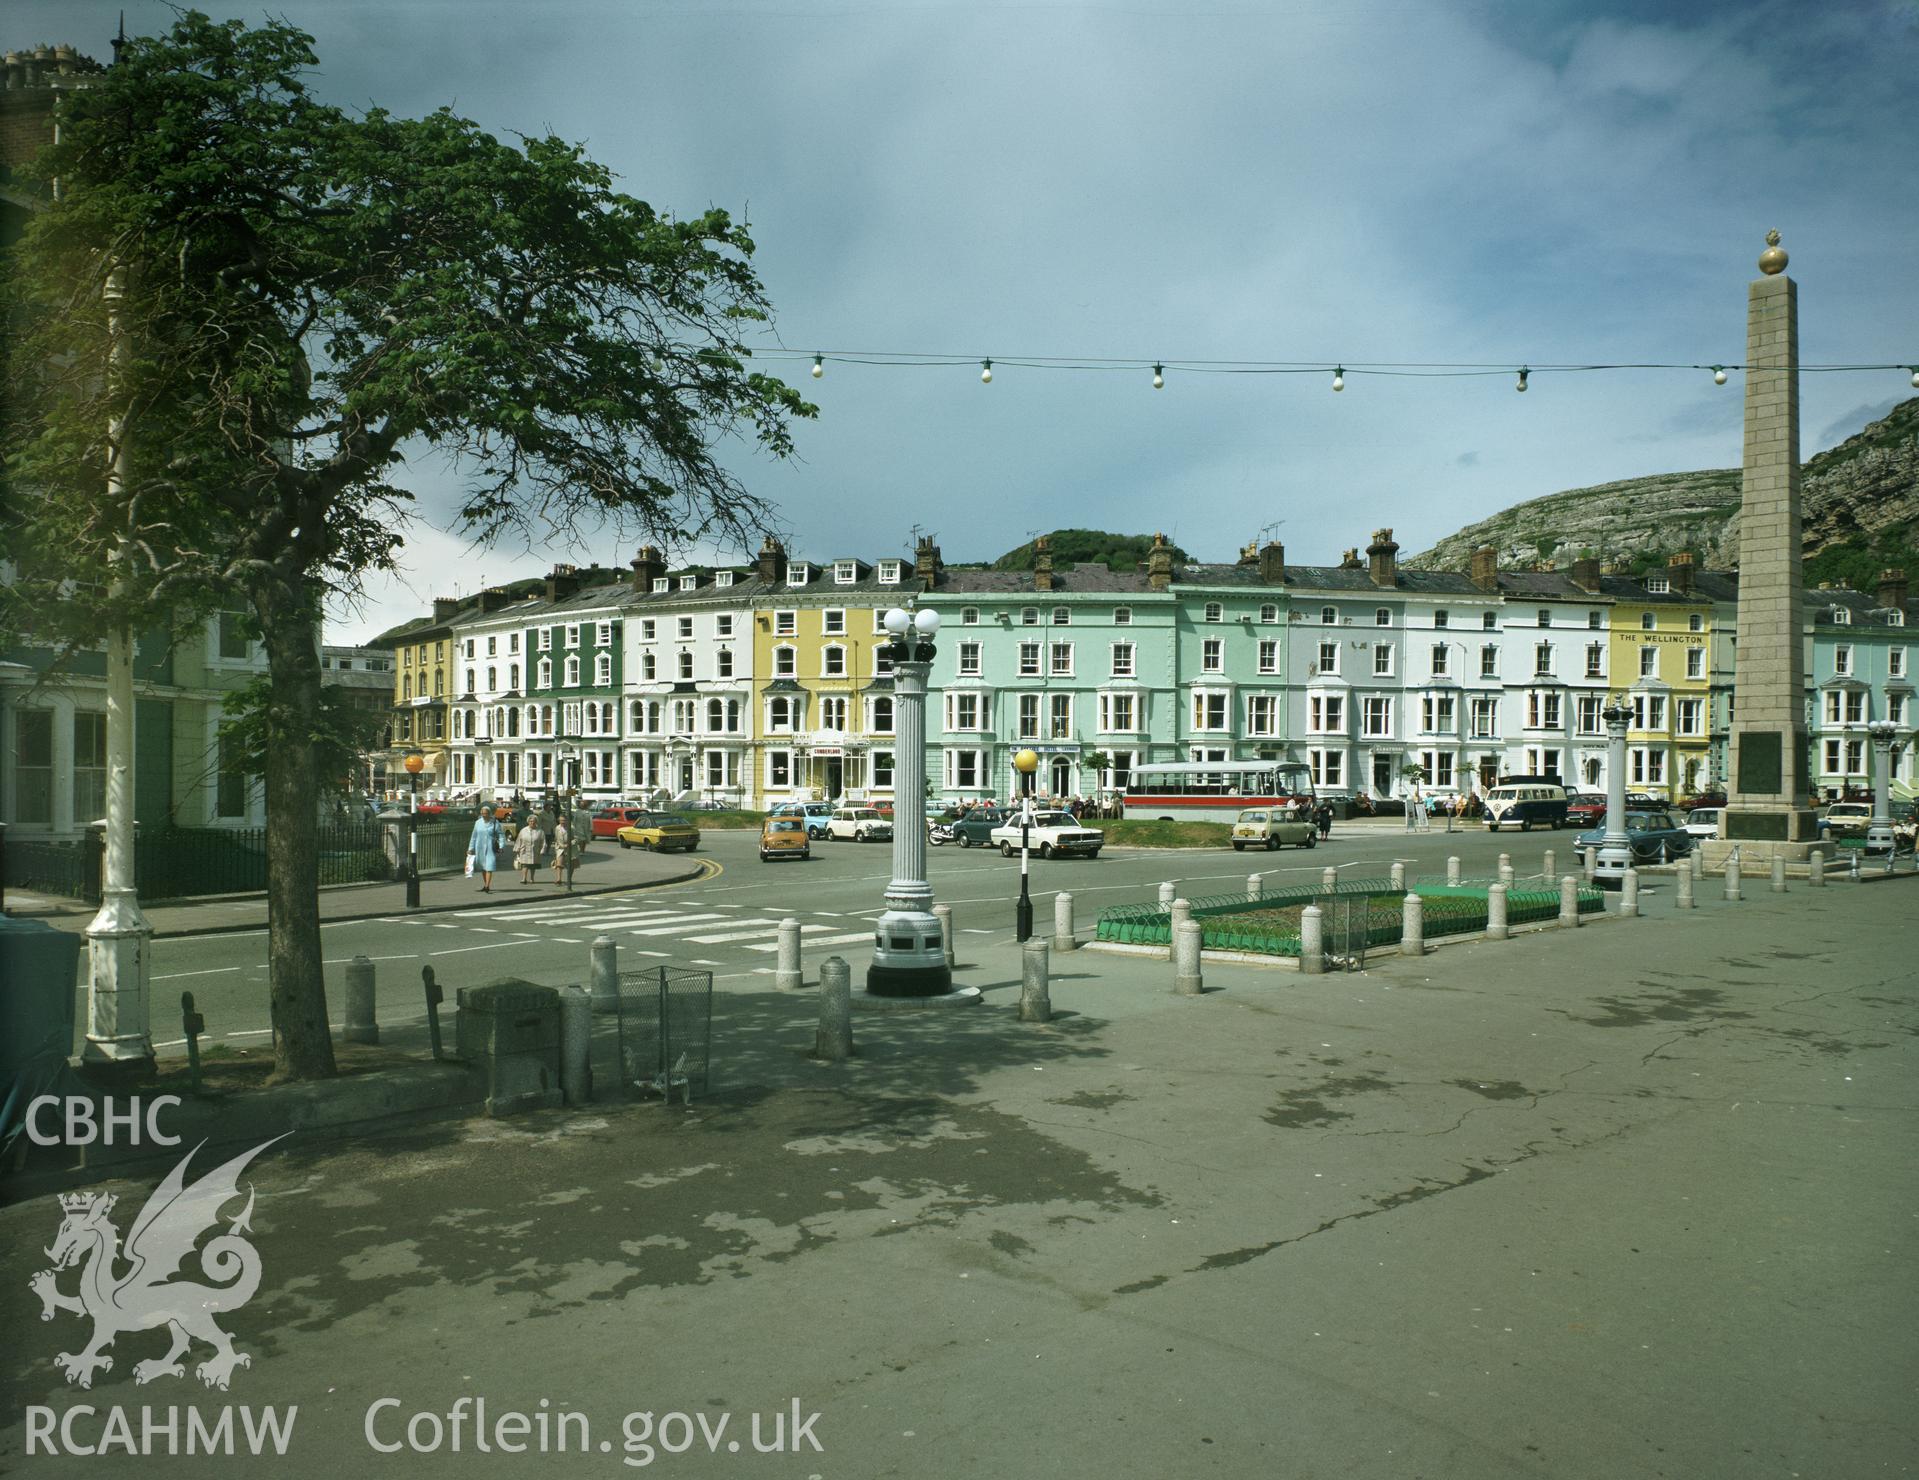 RCAHMW colour transparency showing street scene in Llandudno, taken by Iain Wright, RCAHMW, 1979